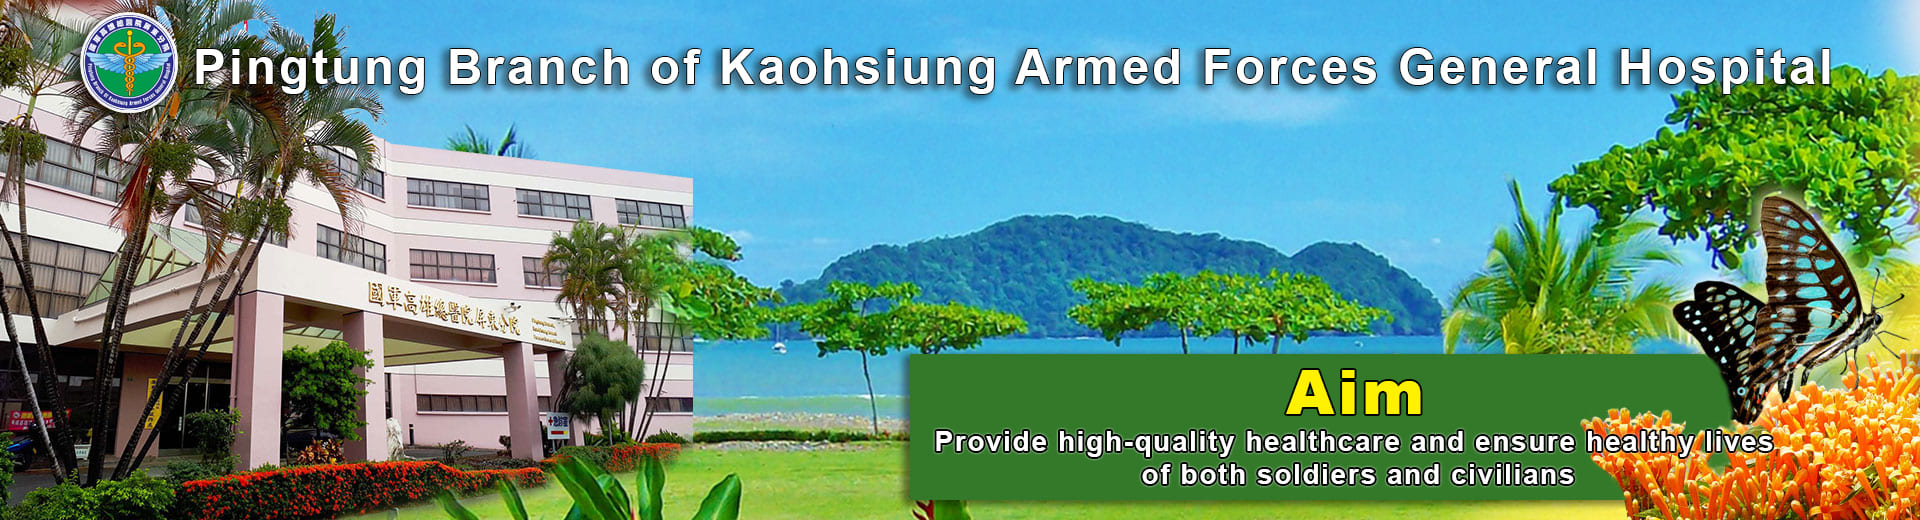 Pingtung Branch of Kaohsiung Armed Forces General Hospital